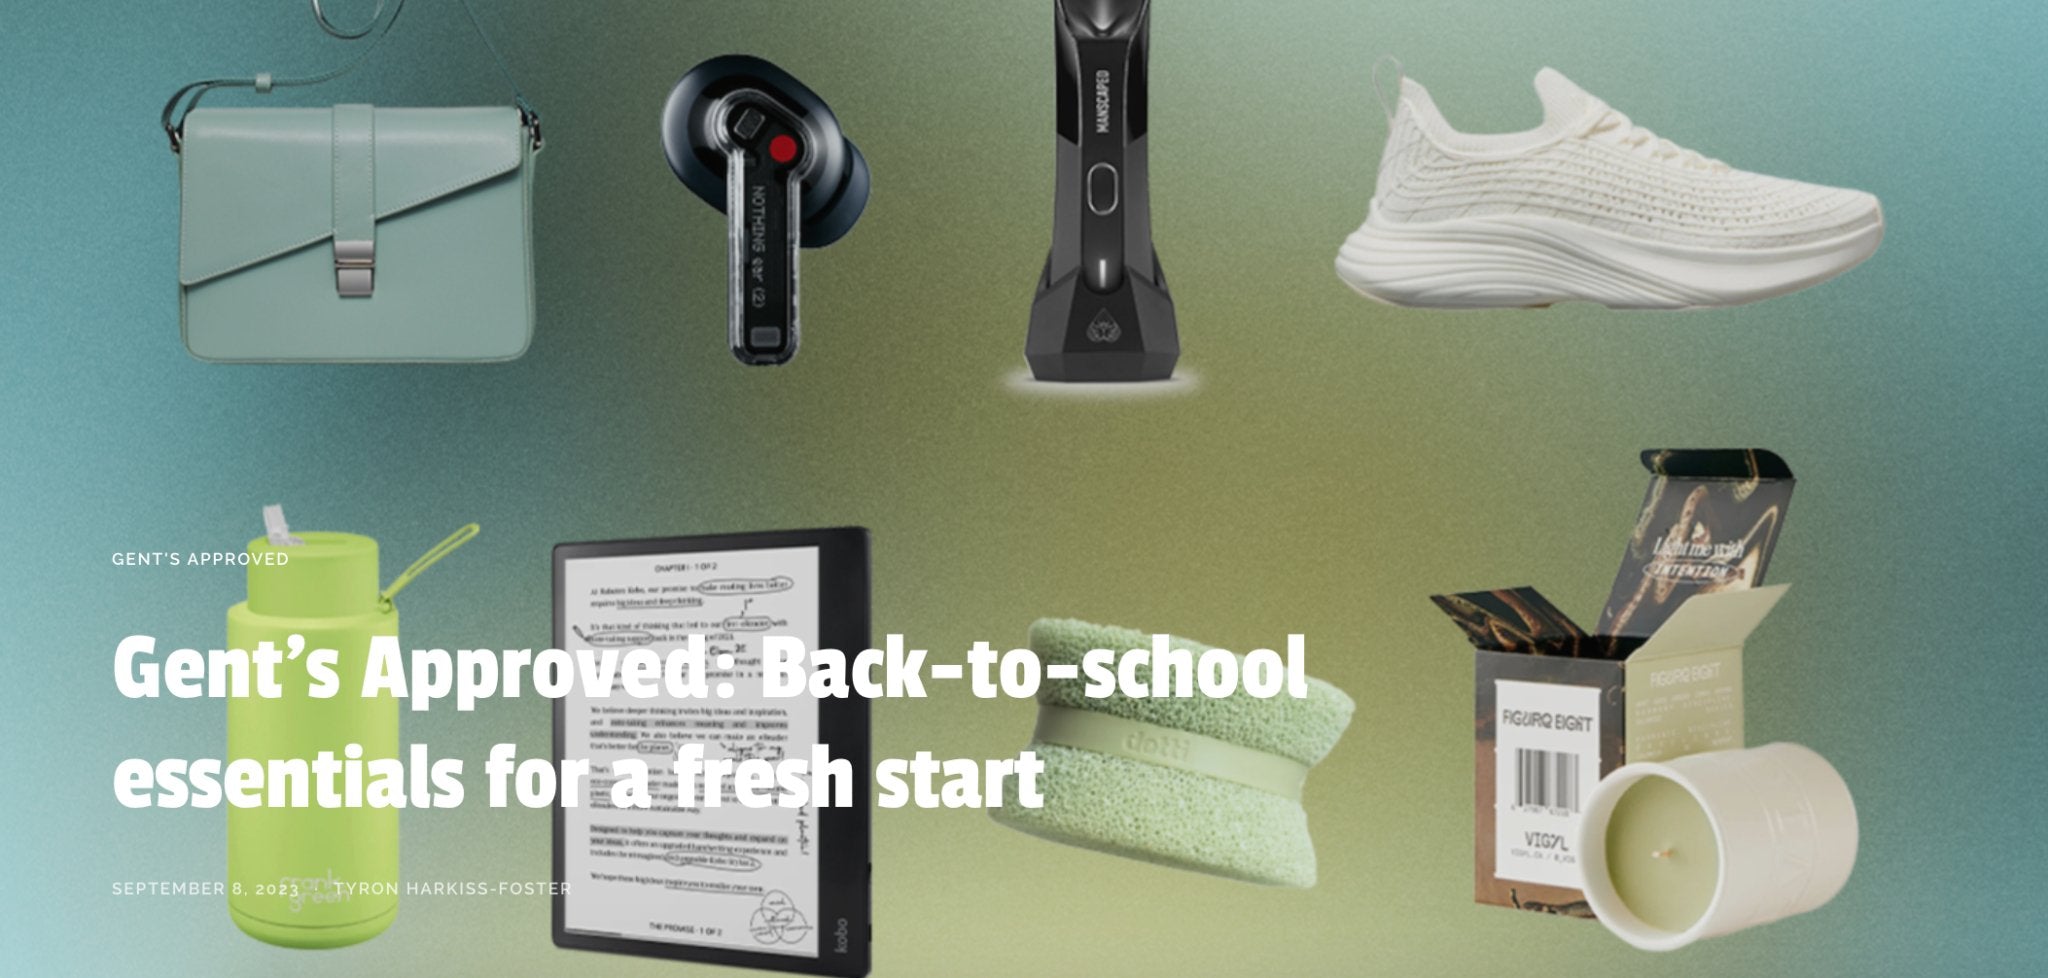 Gent’s Approved: Back-to-school essentials for a fresh start